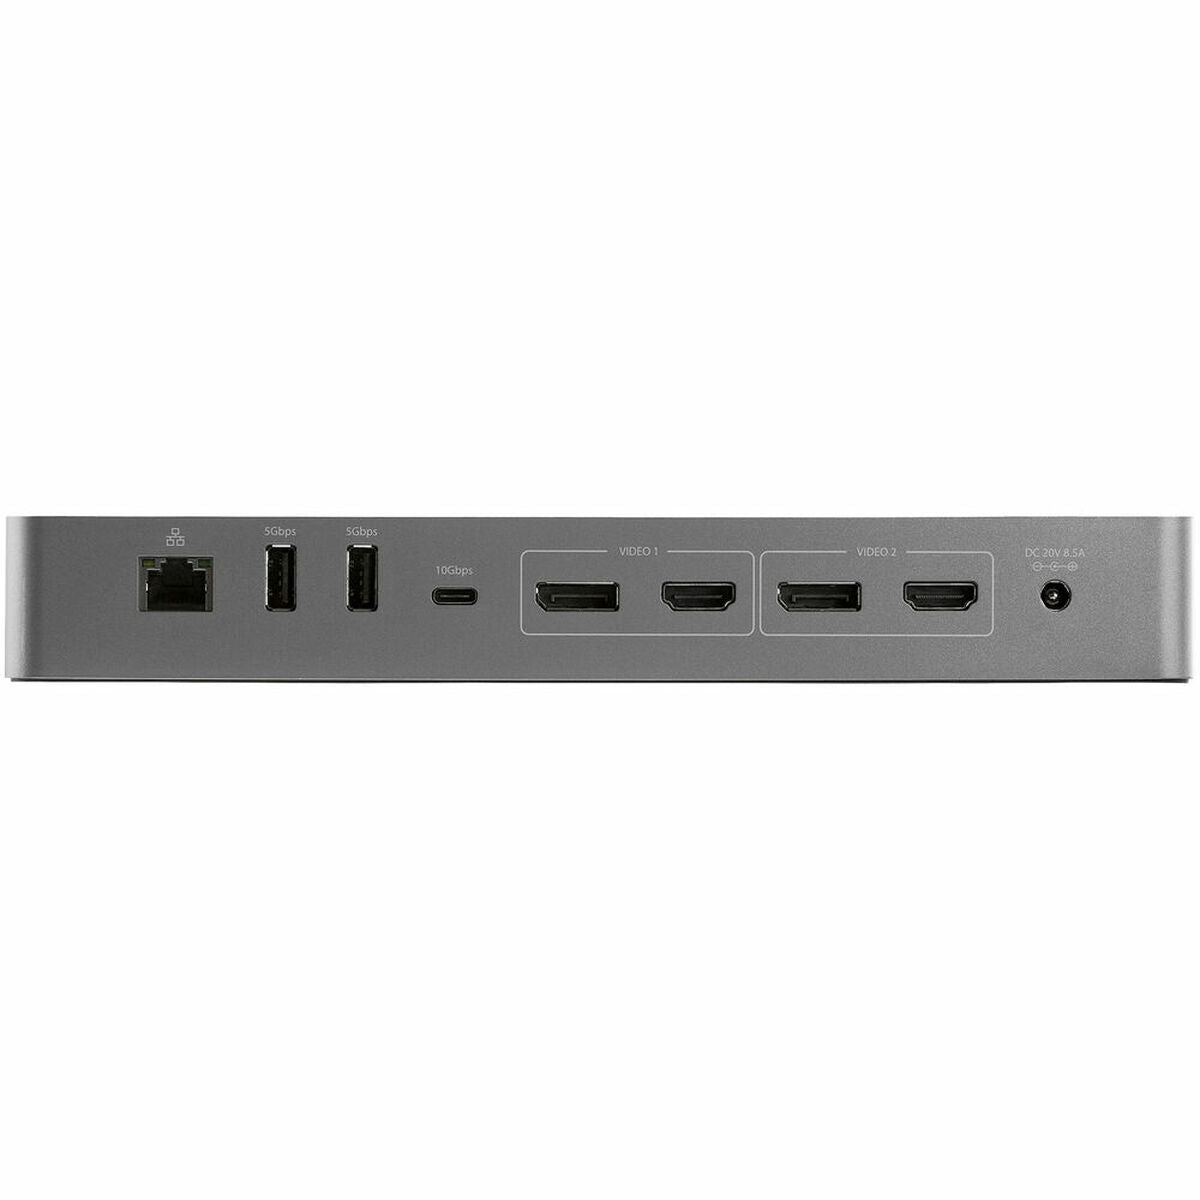 3-Port USB Hub Startech TB3CDK2DHUE, Startech, Computing, Accessories, 3-port-usb-hub-startech-tb3cdk2dhue, Brand_Startech, category-reference-2609, category-reference-2803, category-reference-2829, category-reference-t-19685, category-reference-t-19908, Condition_NEW, networks/wiring, Price_200 - 300, Teleworking, RiotNook